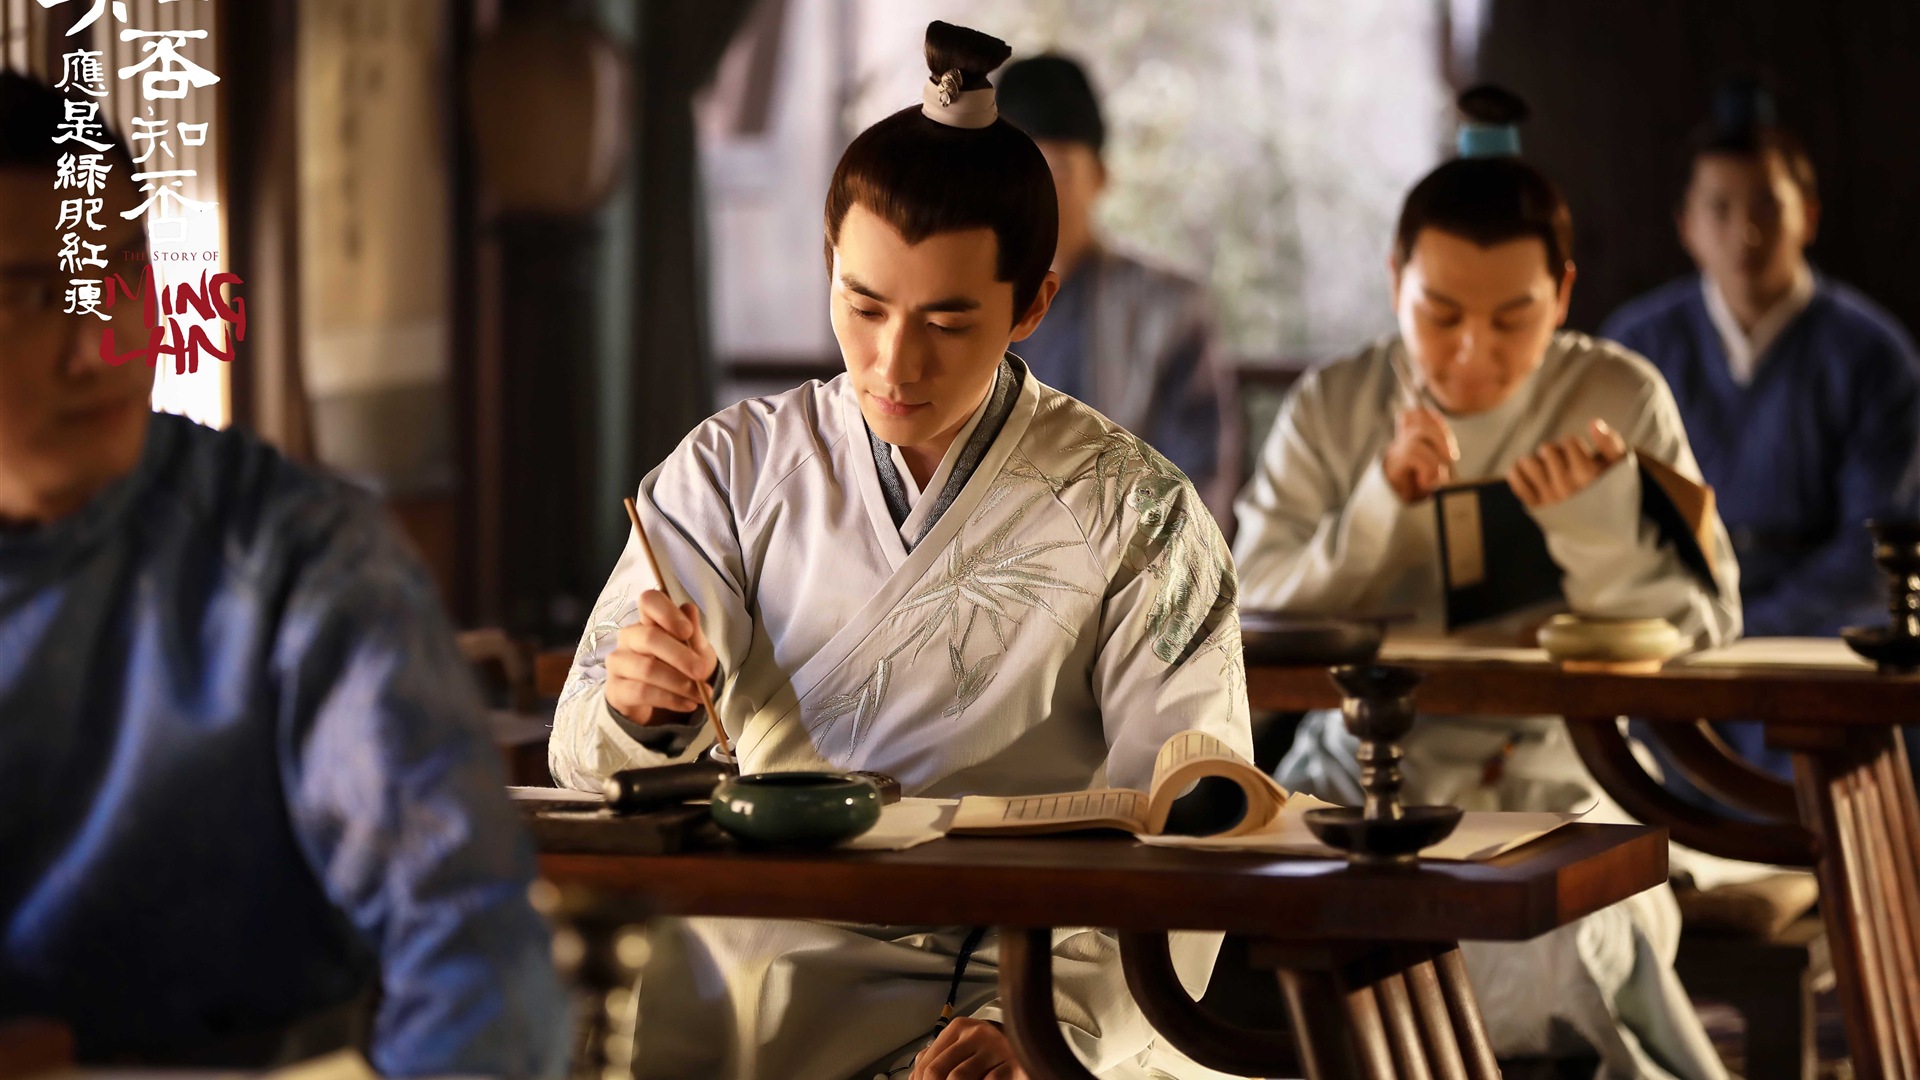 The Story Of MingLan, TV series HD wallpapers #37 - 1920x1080